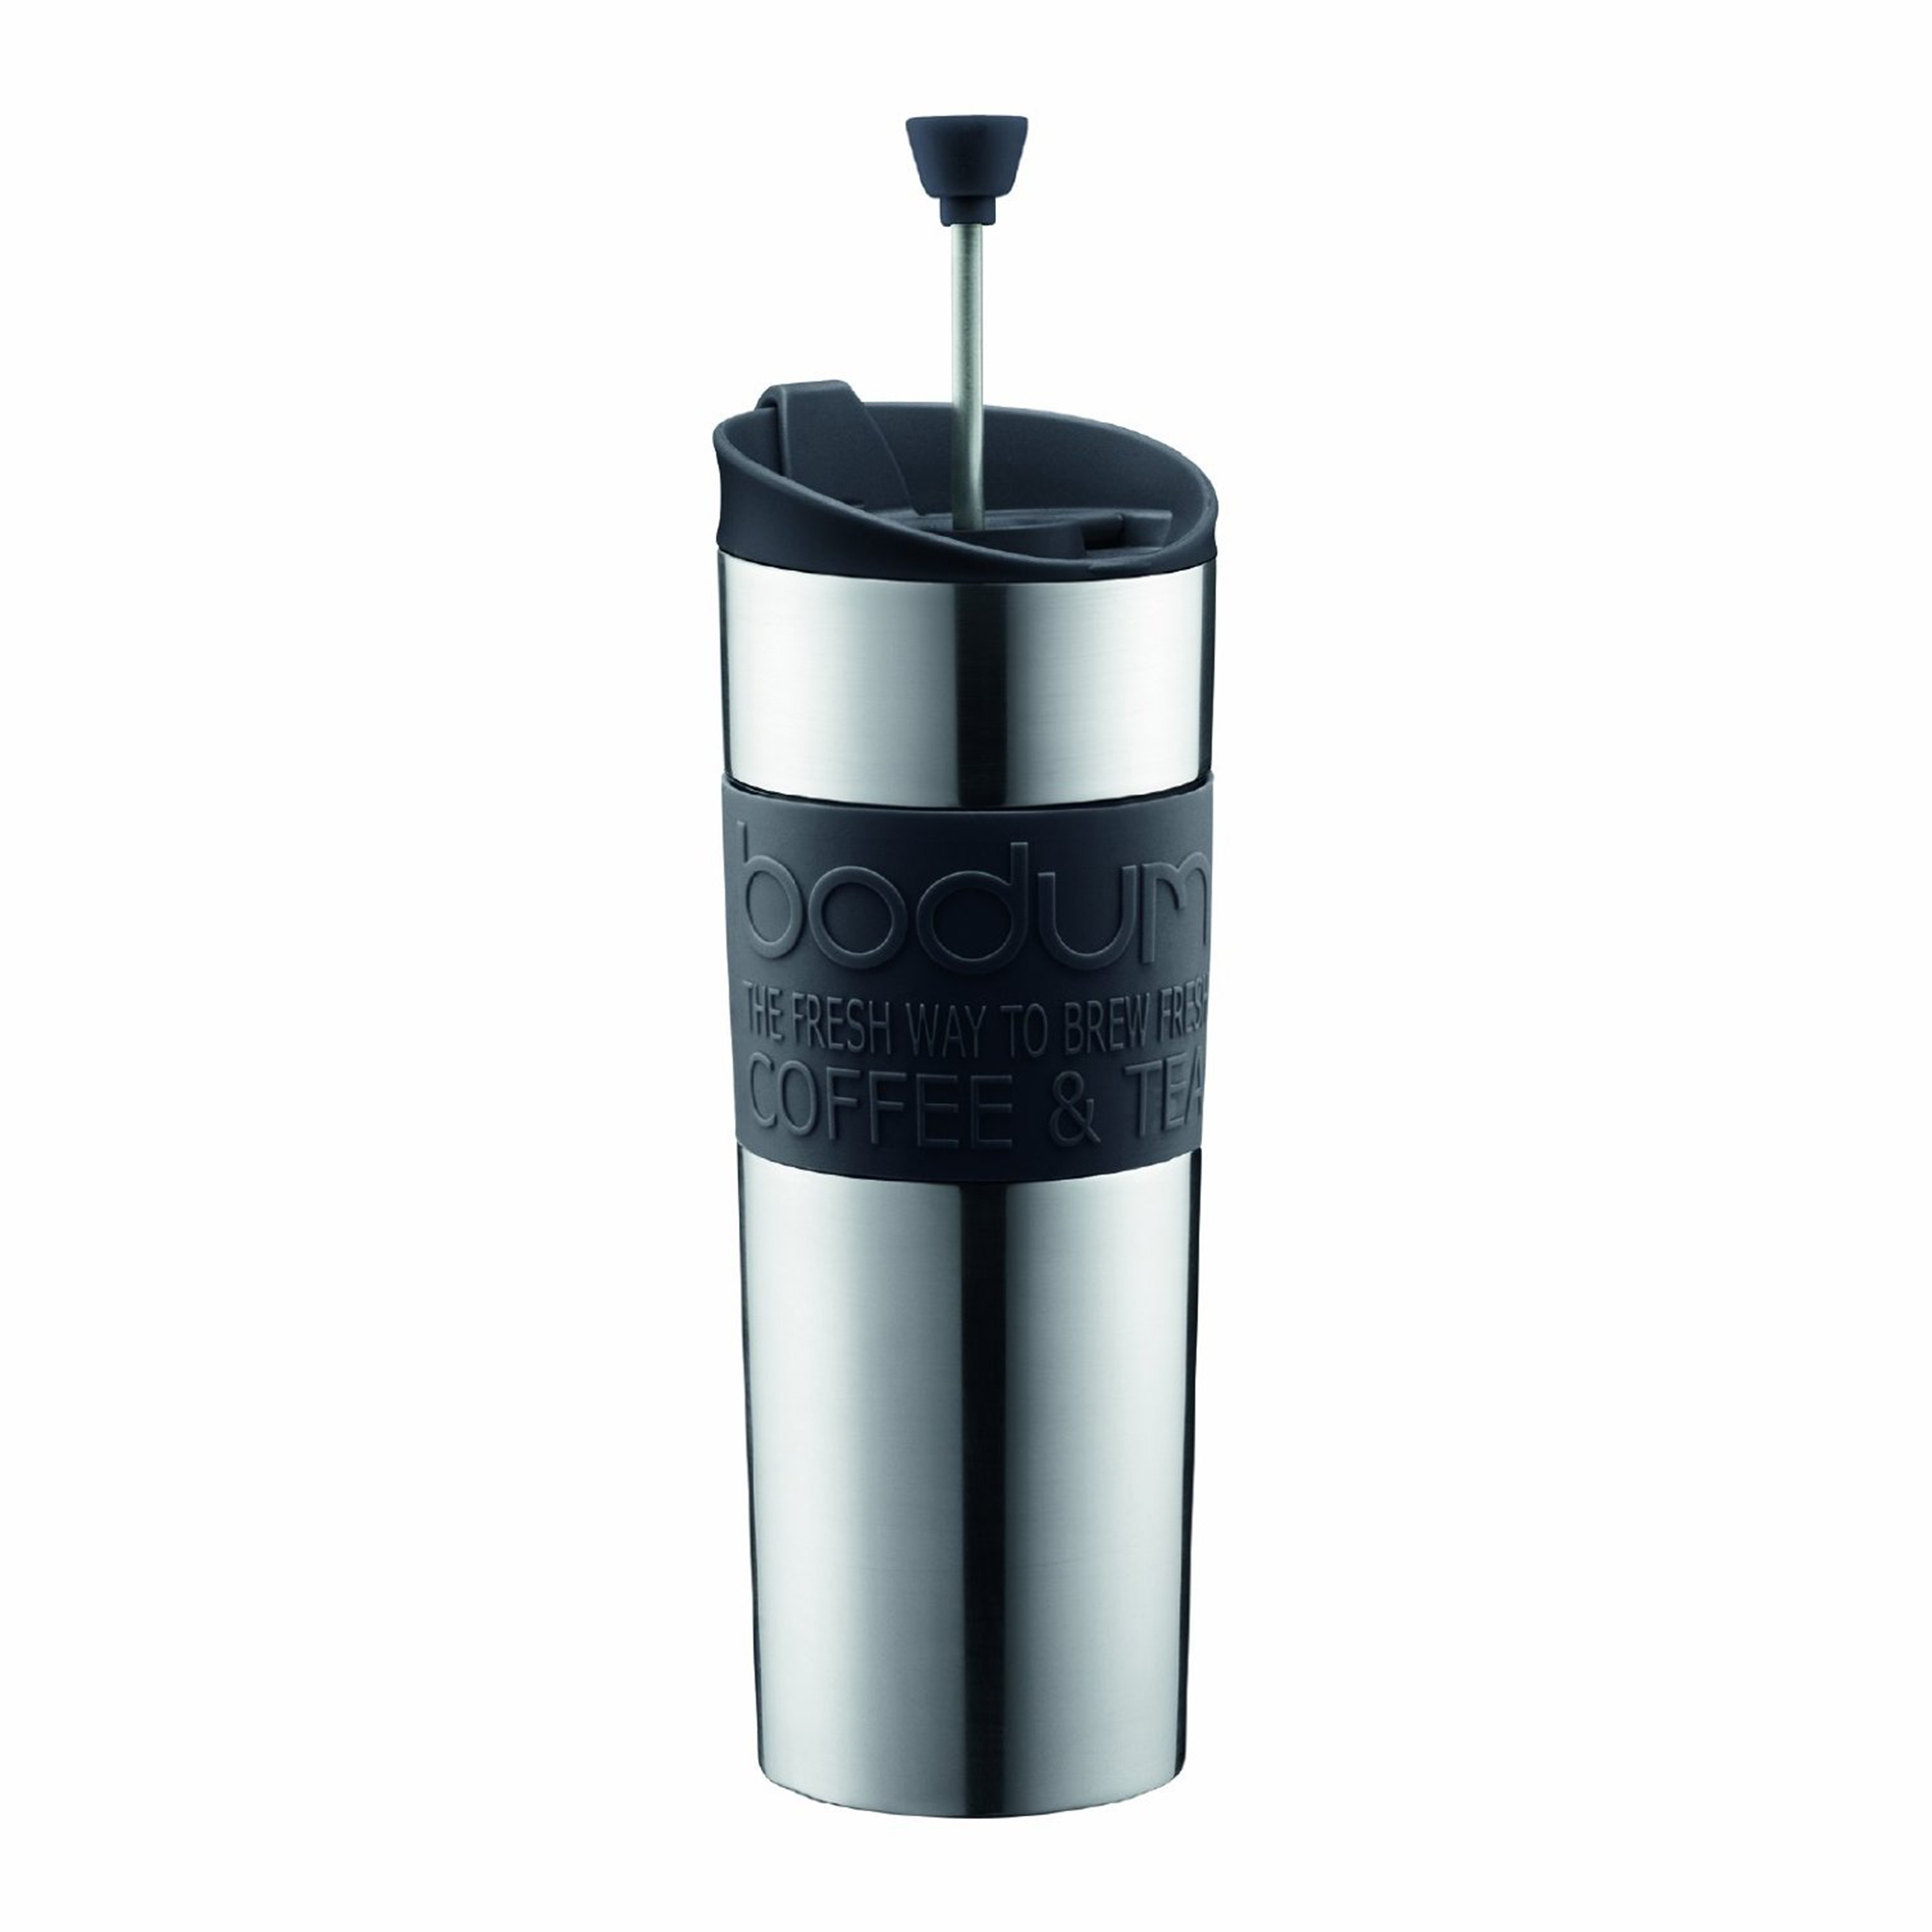 Coffee maker and 16 oz. travel mug in one. Available in stainless. Brew coffee or tea on the go Keeps beverages hot or cold longer Spill resistant lid Great for travel, home, or office